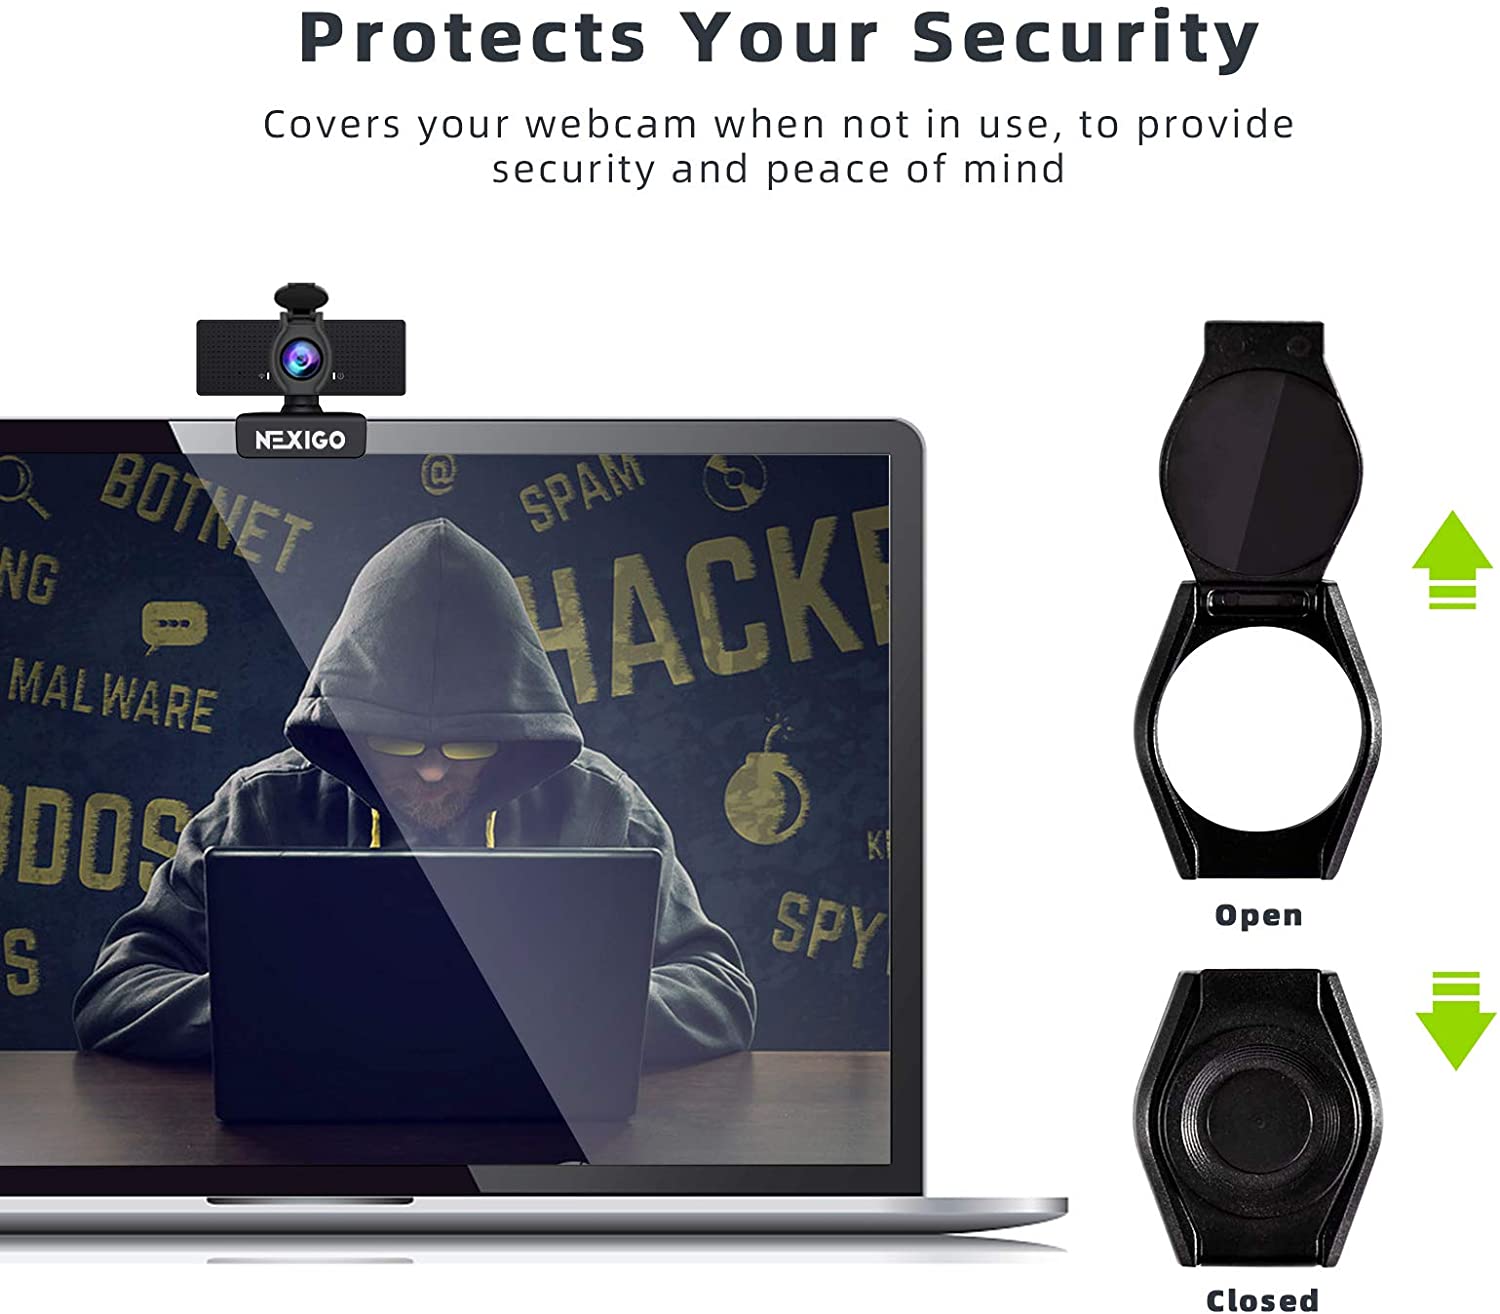 Protect your privacy by covering your webcam when not in use.